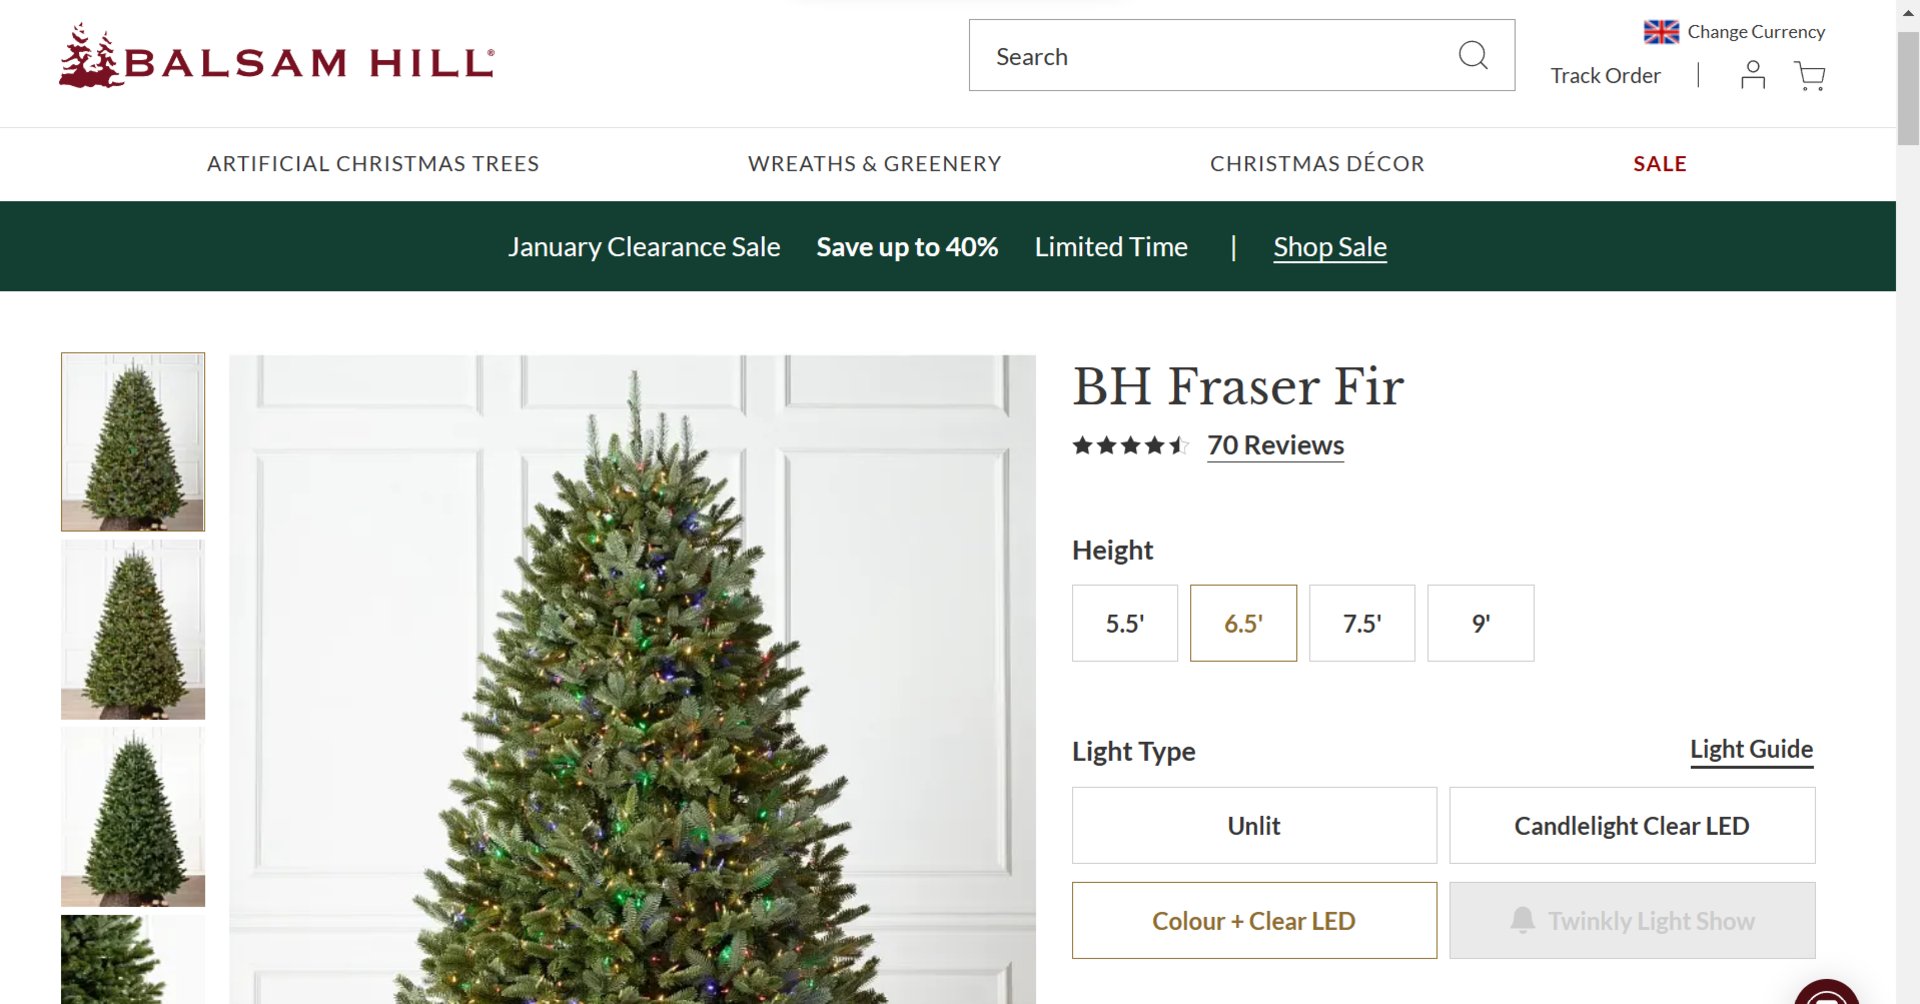 BH (The worlds leading Christmas Trees) BH Fraser Fir 6.5ft with LED Colour & Clear LED Lights. - Image 2 of 2